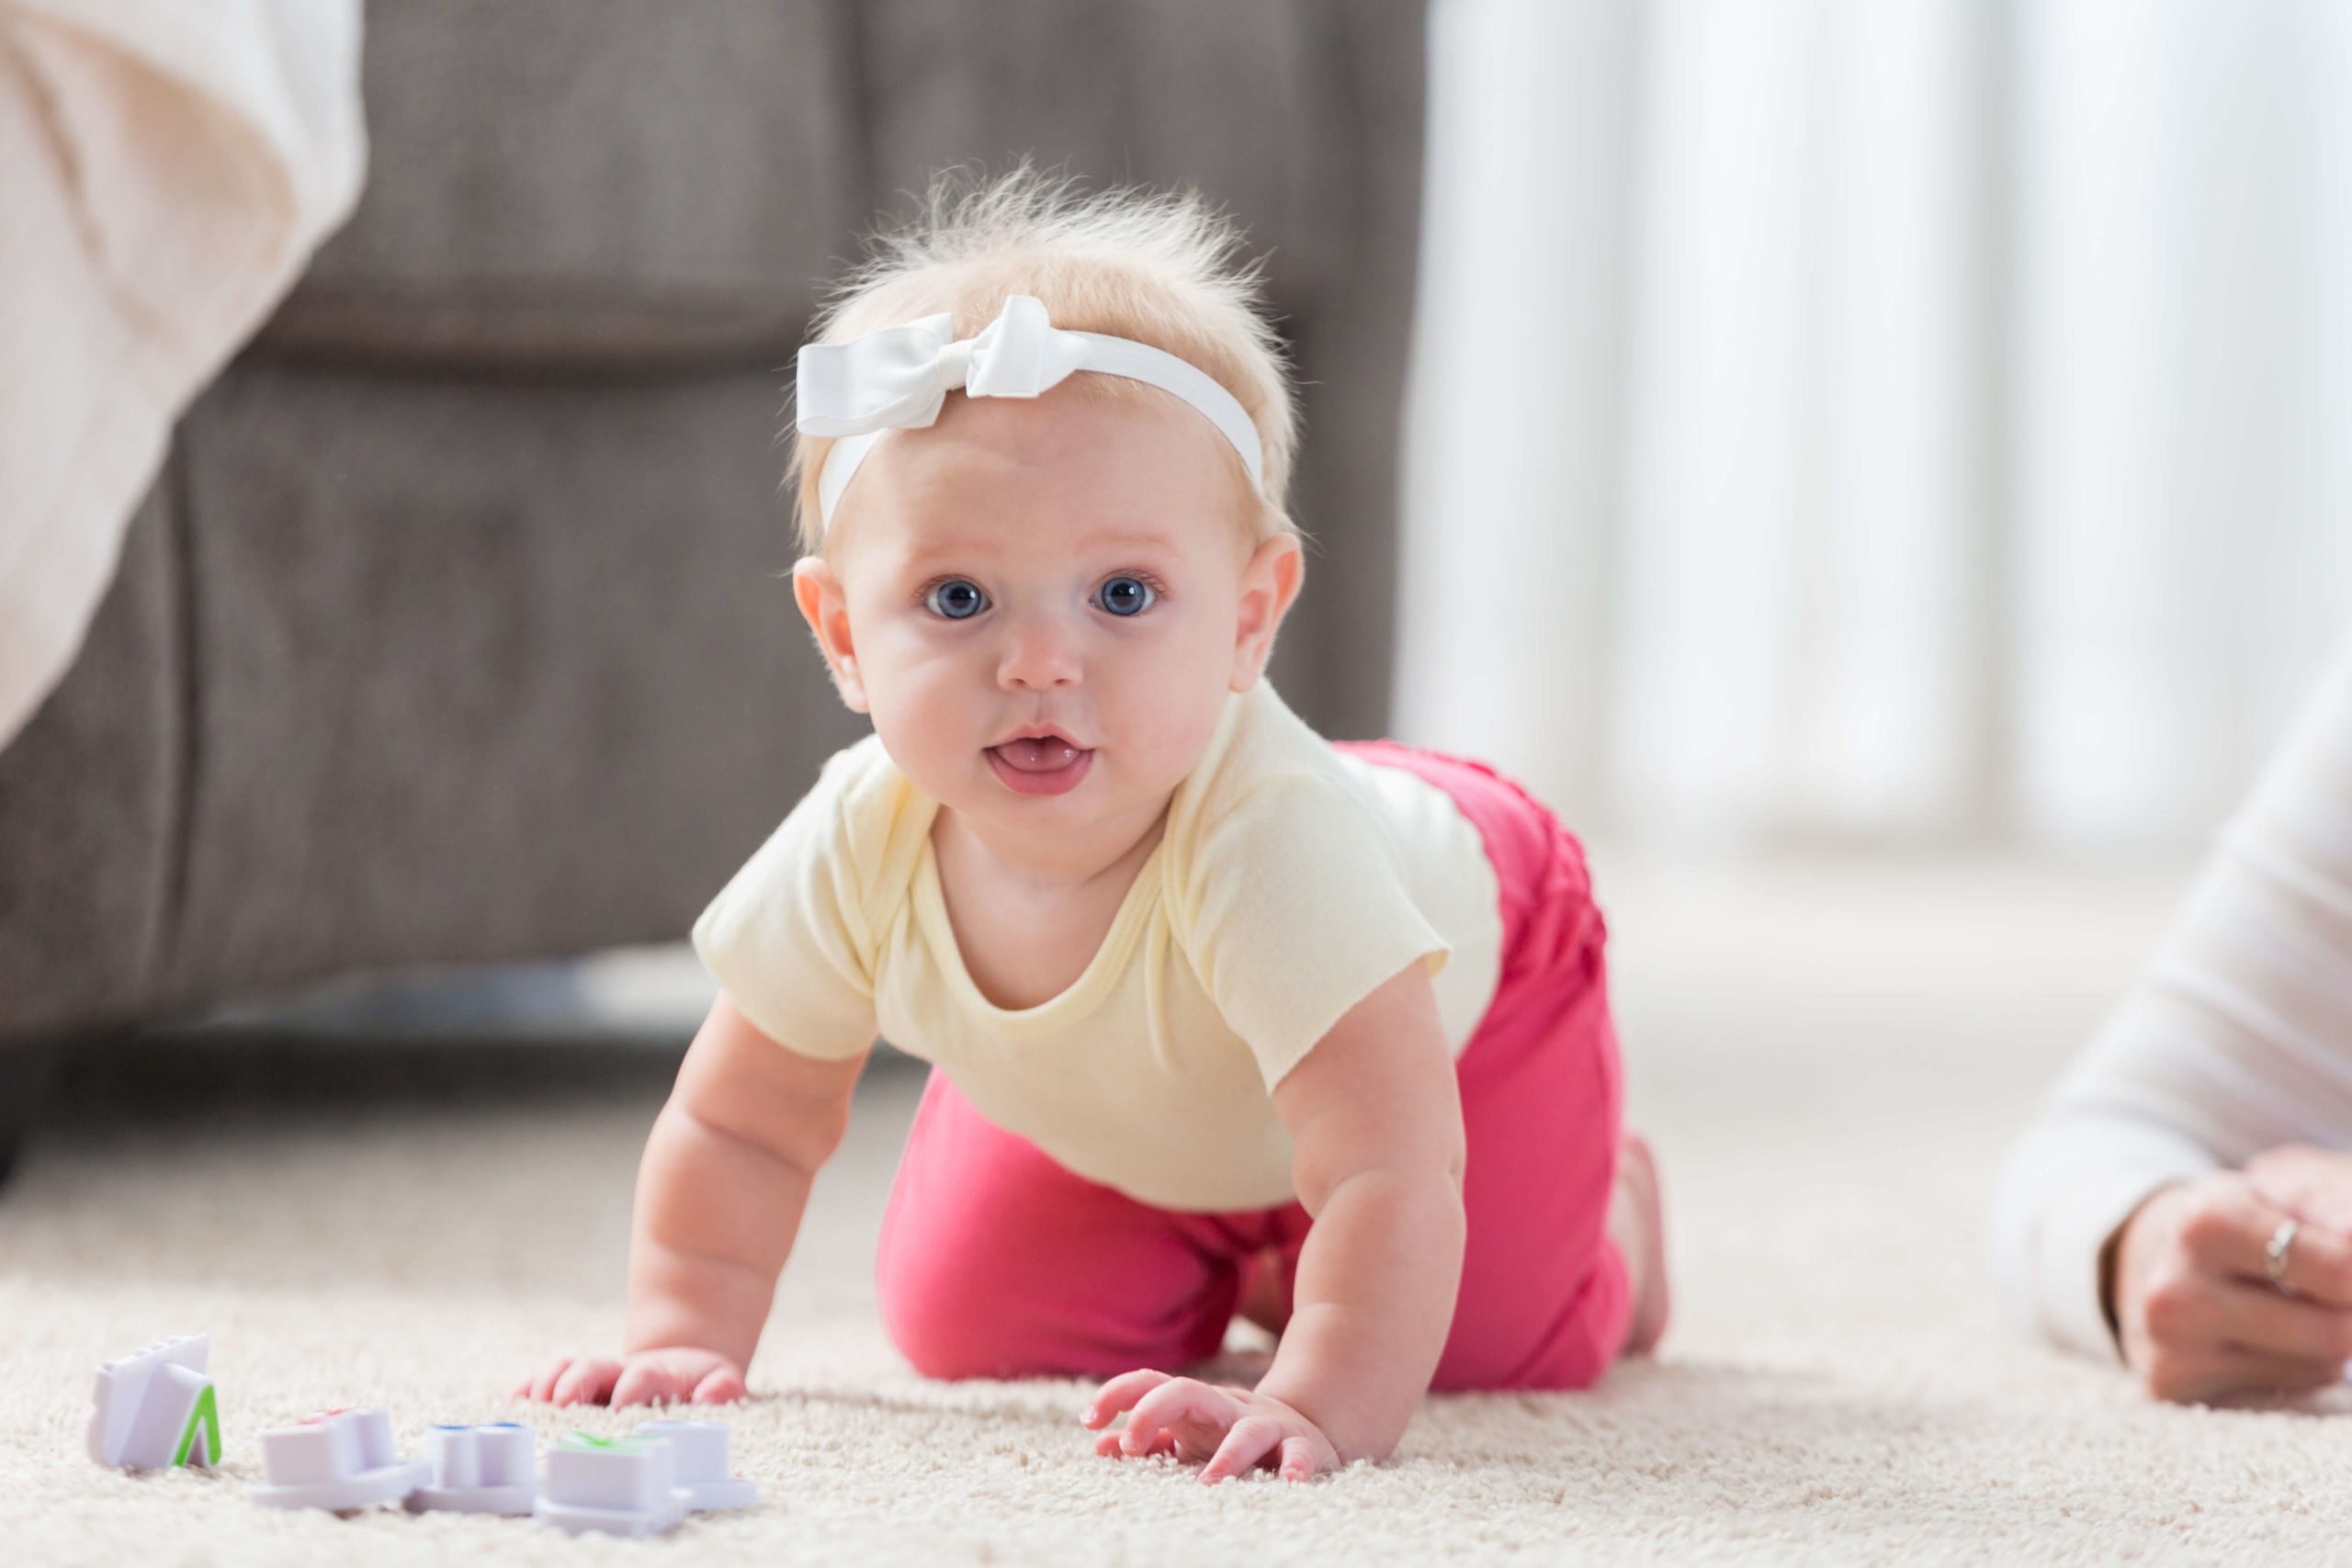 How is crawling a motor skill?